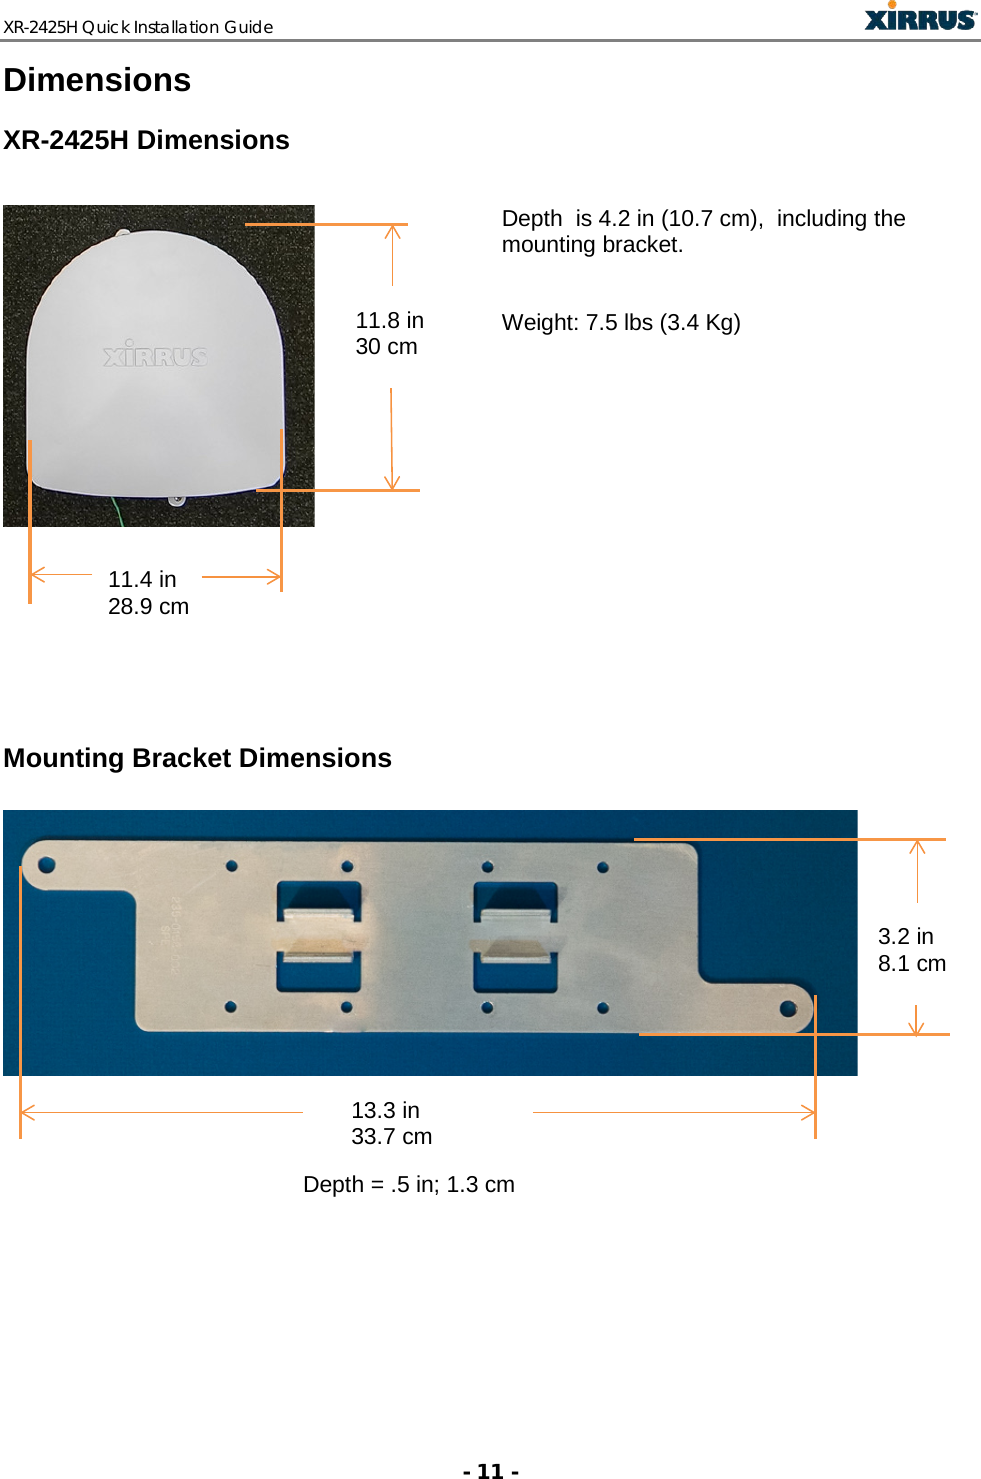 XR-2425H Quick Installation Guide   - 11 - Dimensions XR-2425H Dimensions                                         Depth  is 4.2 in (10.7 cm),  including the mounting bracket.    Weight: 7.5 lbs (3.4 Kg)   Mounting Bracket Dimensions     Depth = .5 in; 1.3 cm   11.4 in 28.9 cm  11.8 in 30 cm  13.3 in 33.7 cm   3.2 in 8.1 cm  